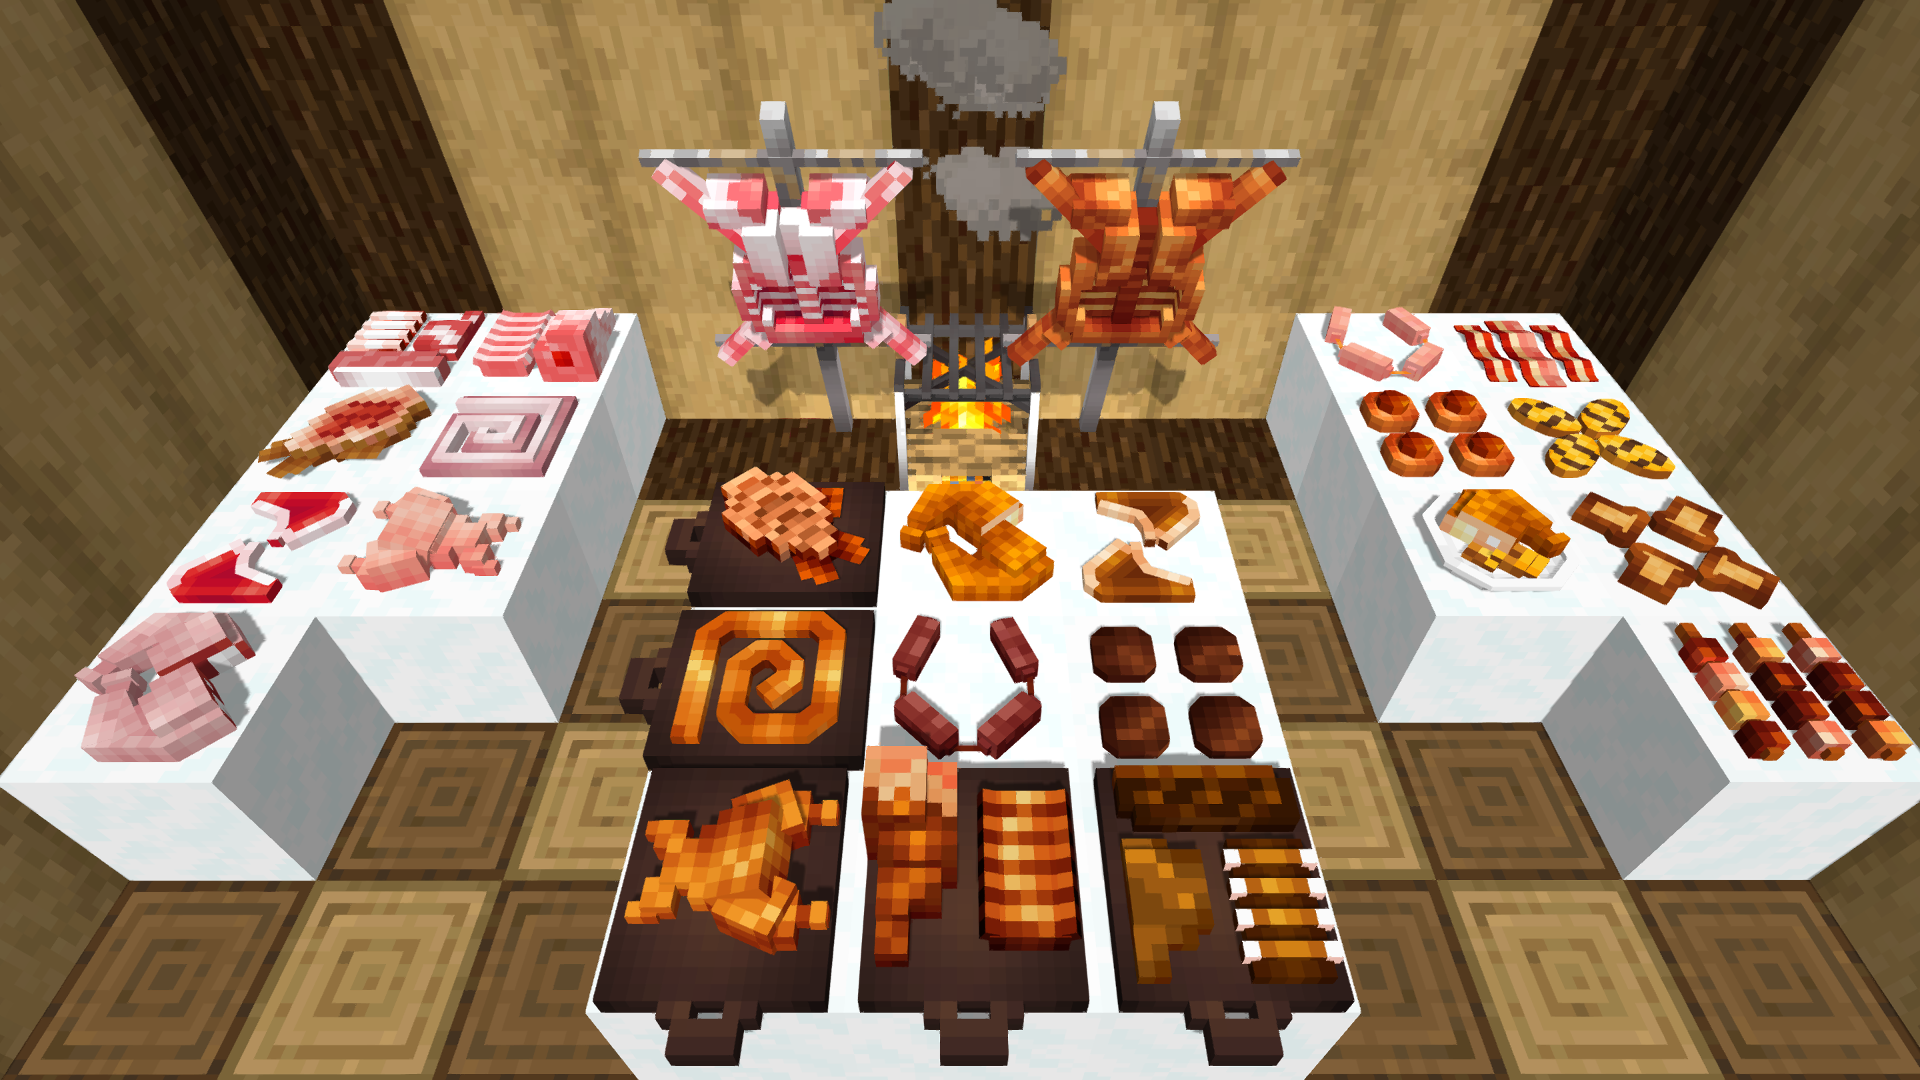 Enjoy the food that this mod adds